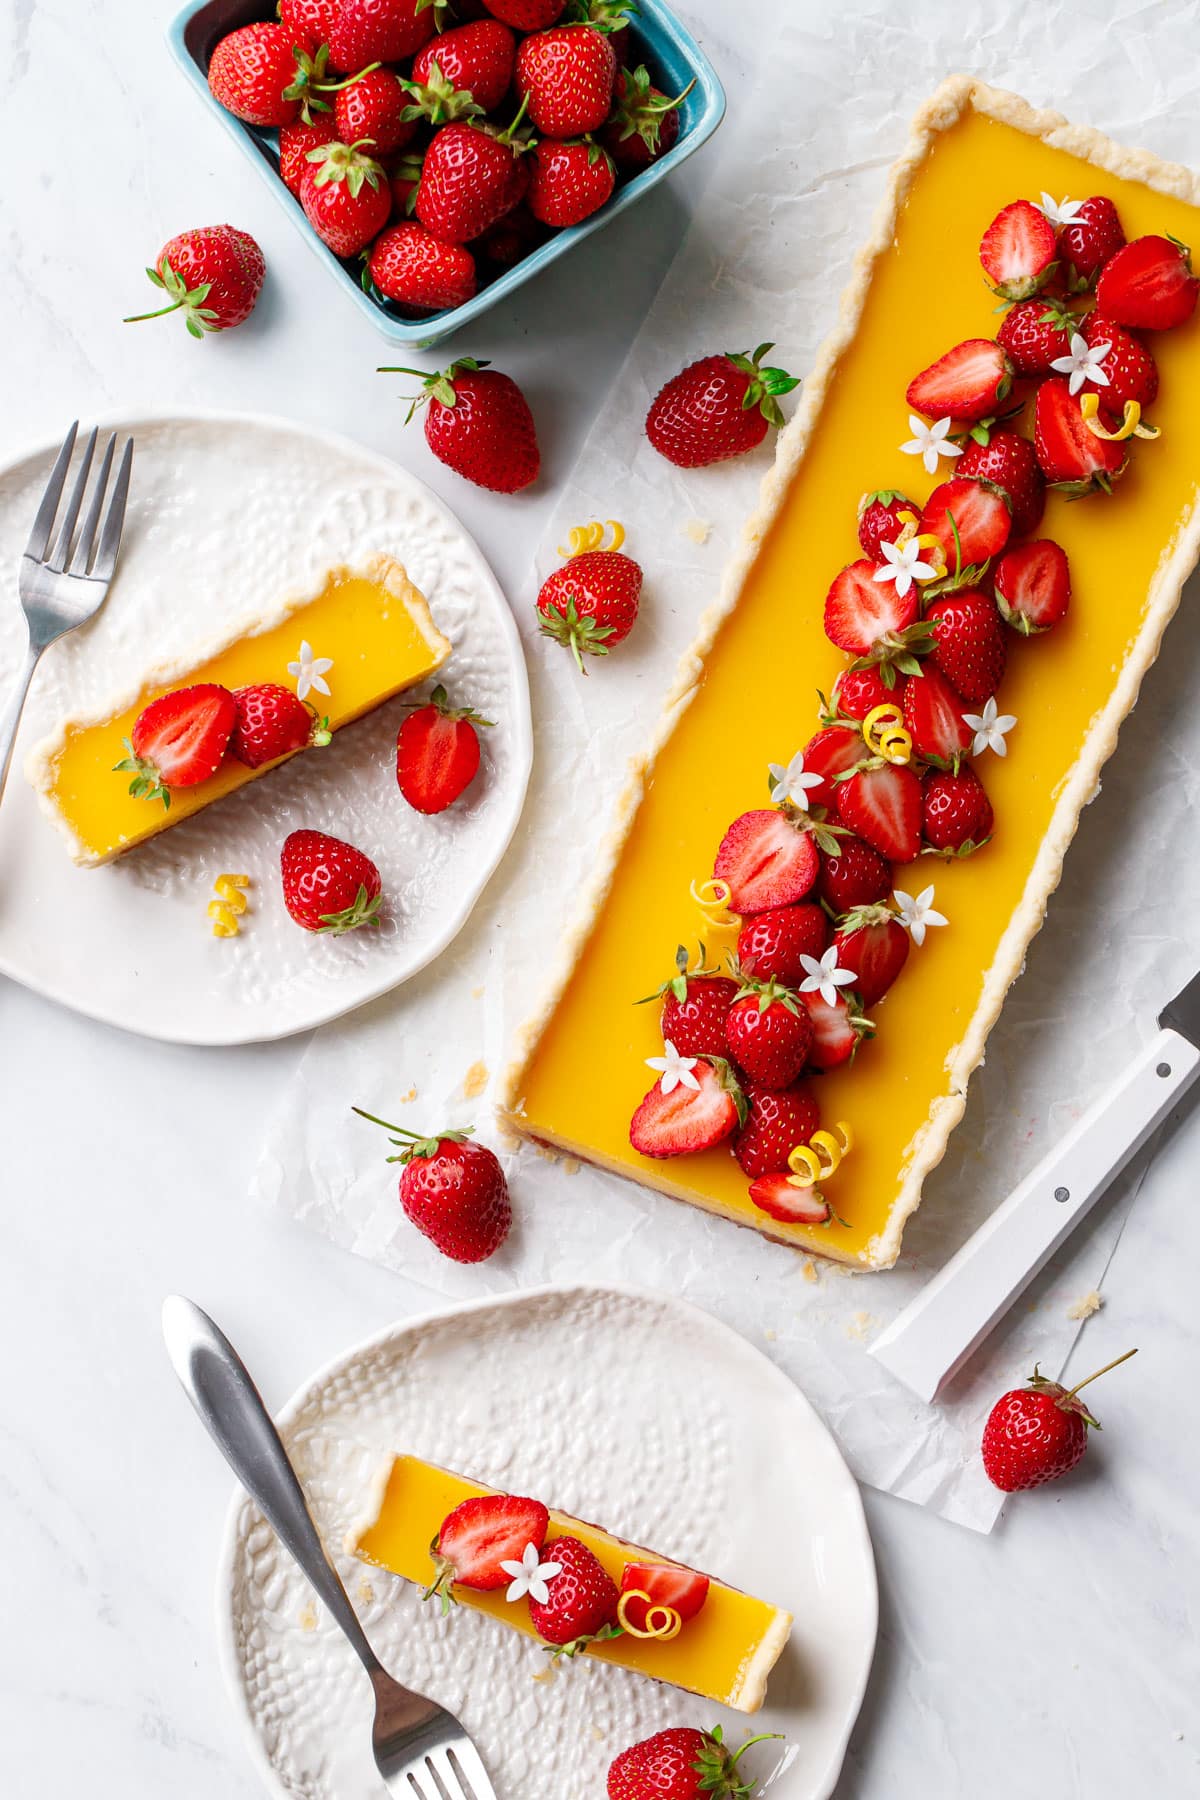 Overhead, plates with slices of Strawberry Meyer Lemon Tart, plus the whole rectangular tart and a basket of strawberries on the side.